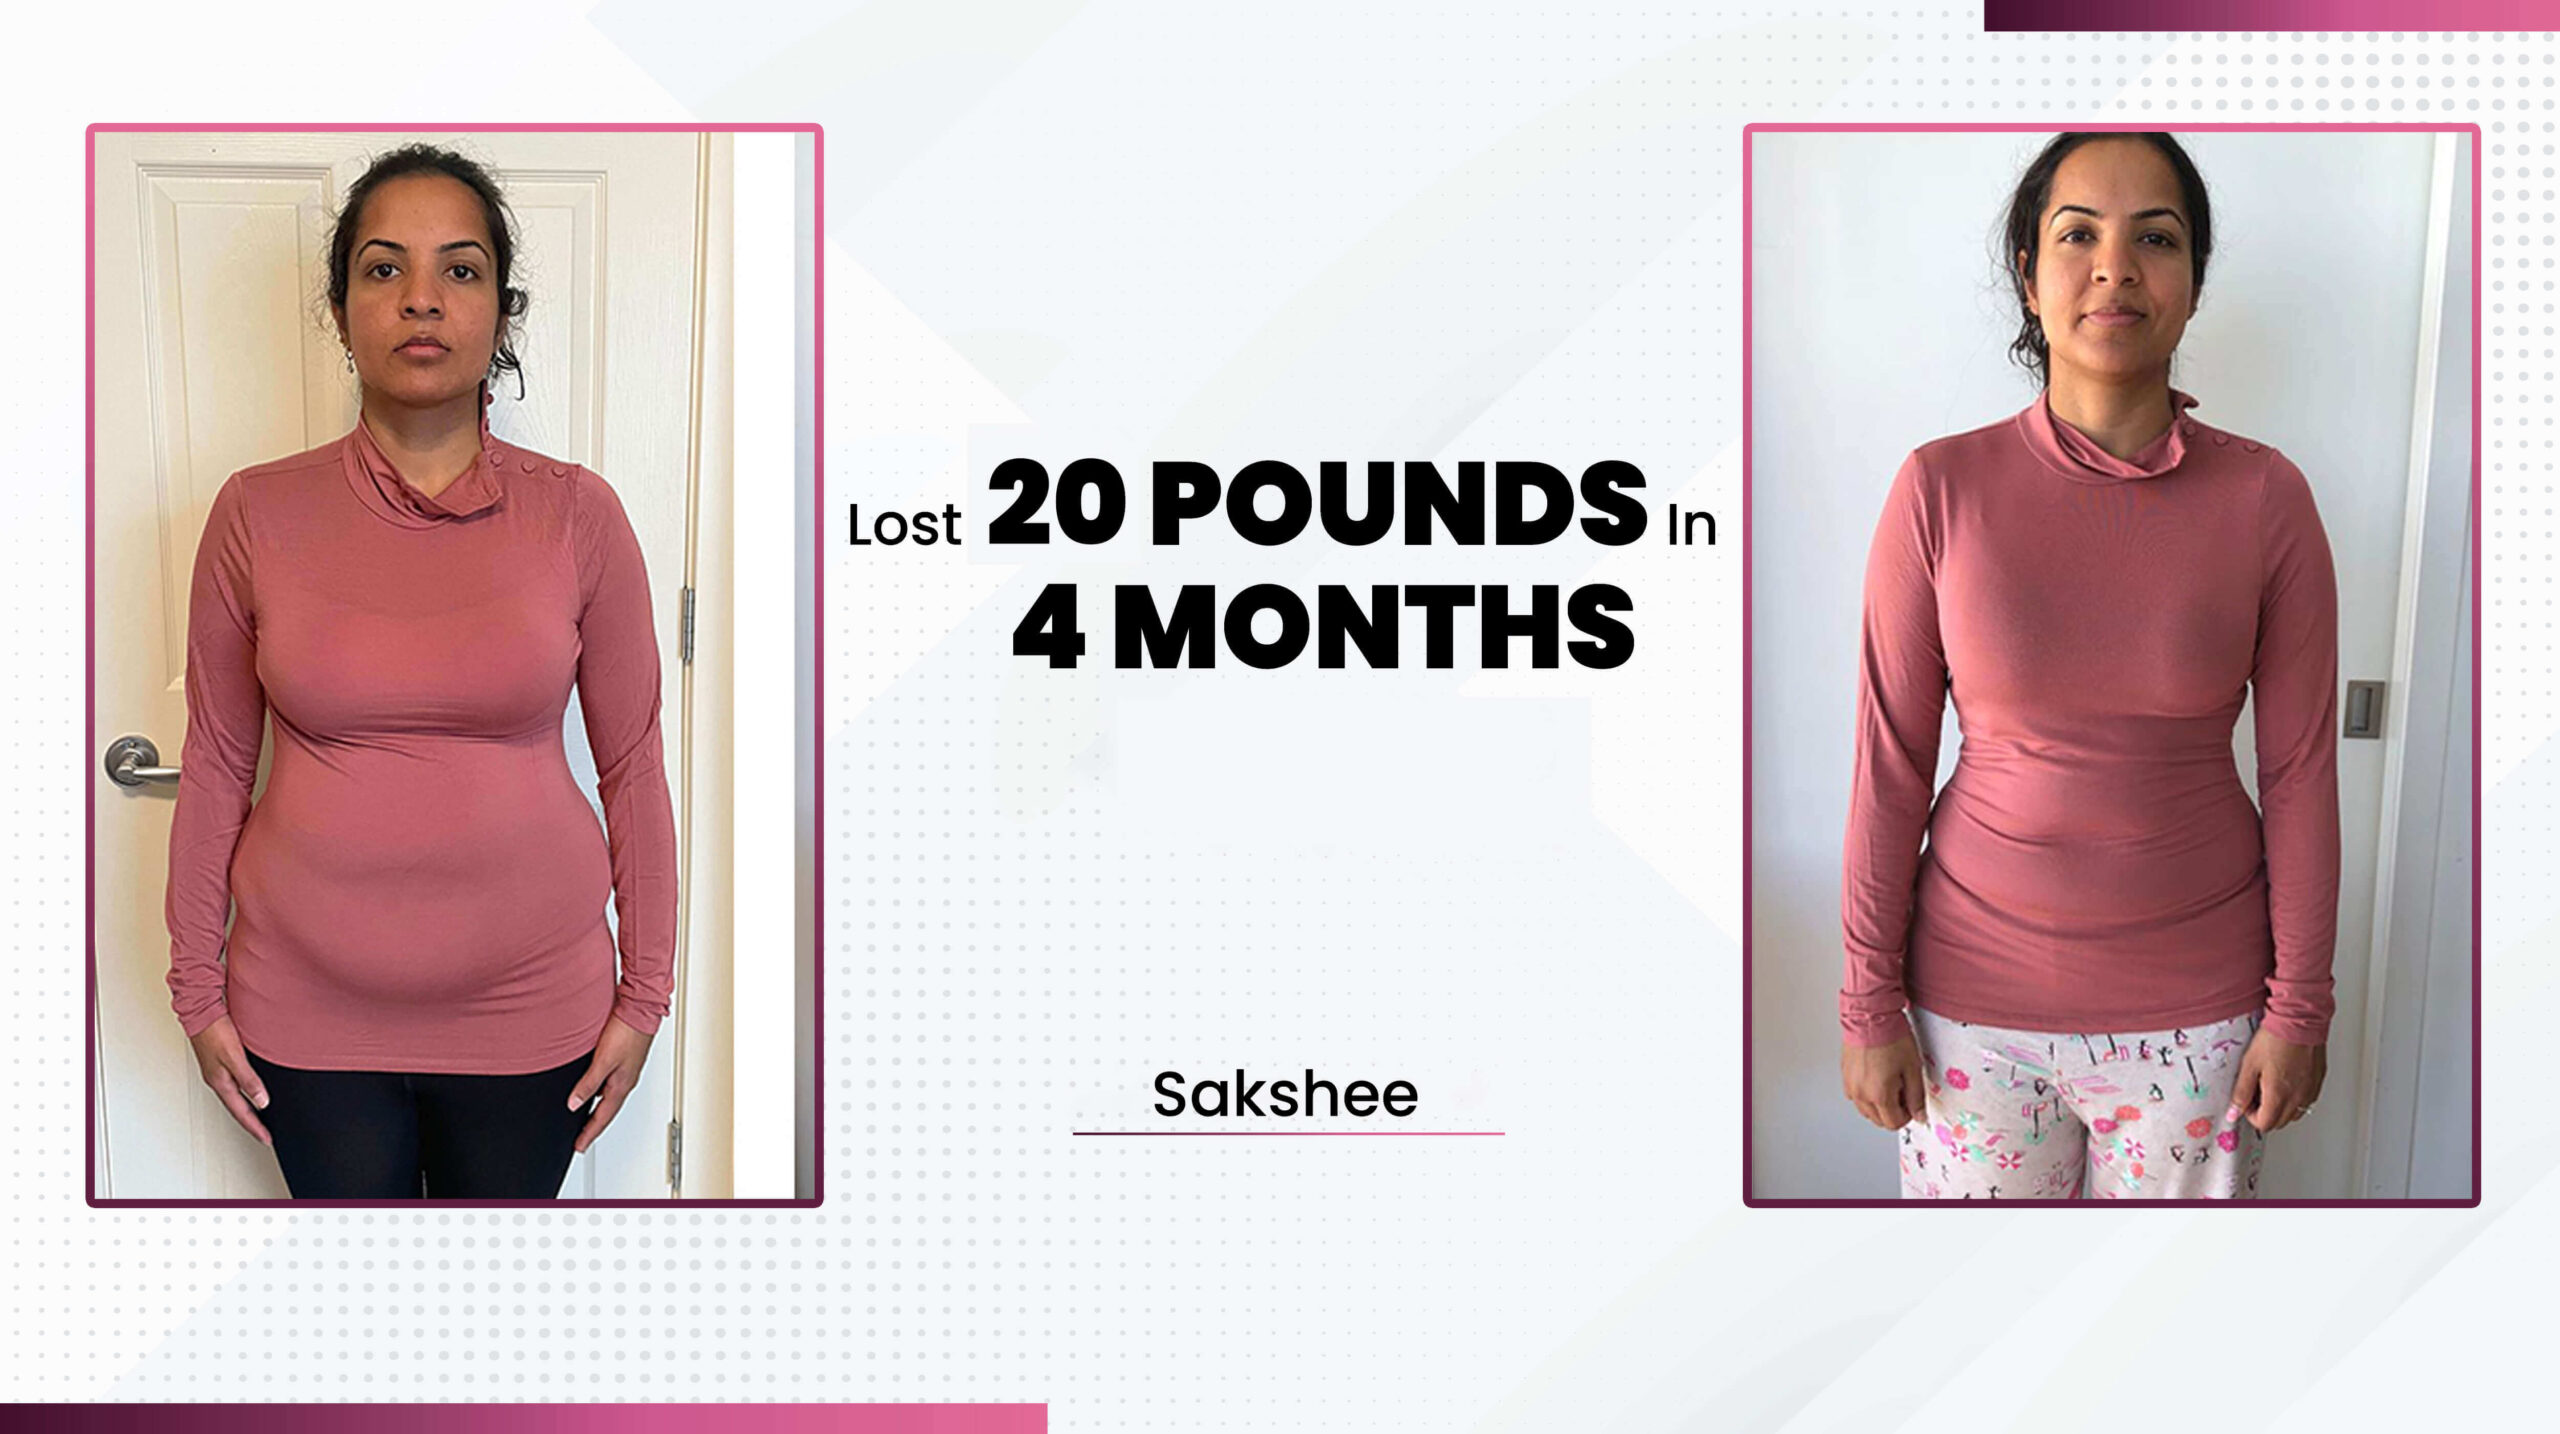 11sakshee weight loss transformation in 4 months during our weight loss programs